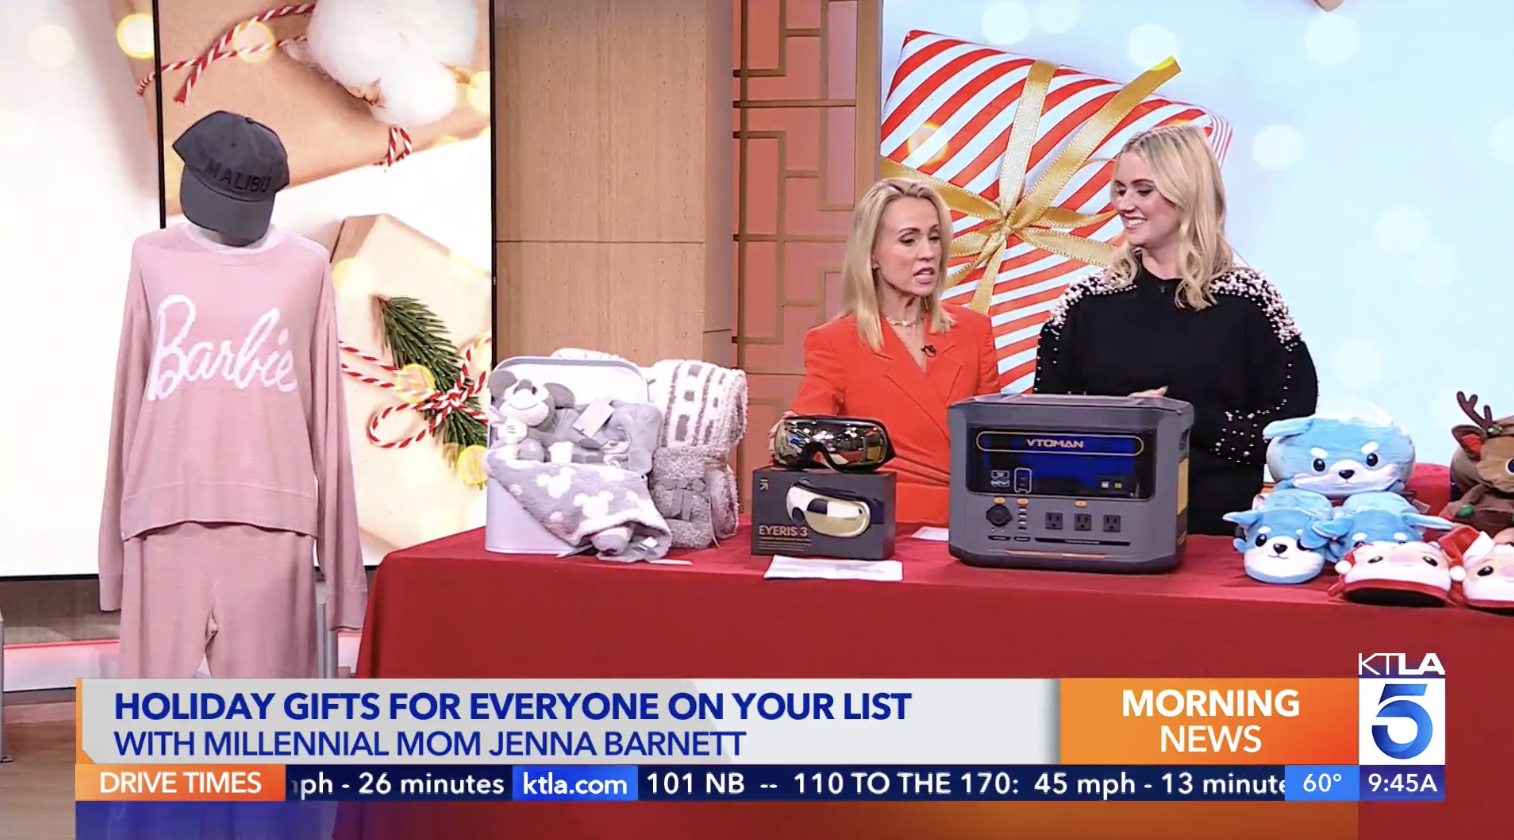 KTLA: Holiday Gifts for the Whole Family Millennial Mom